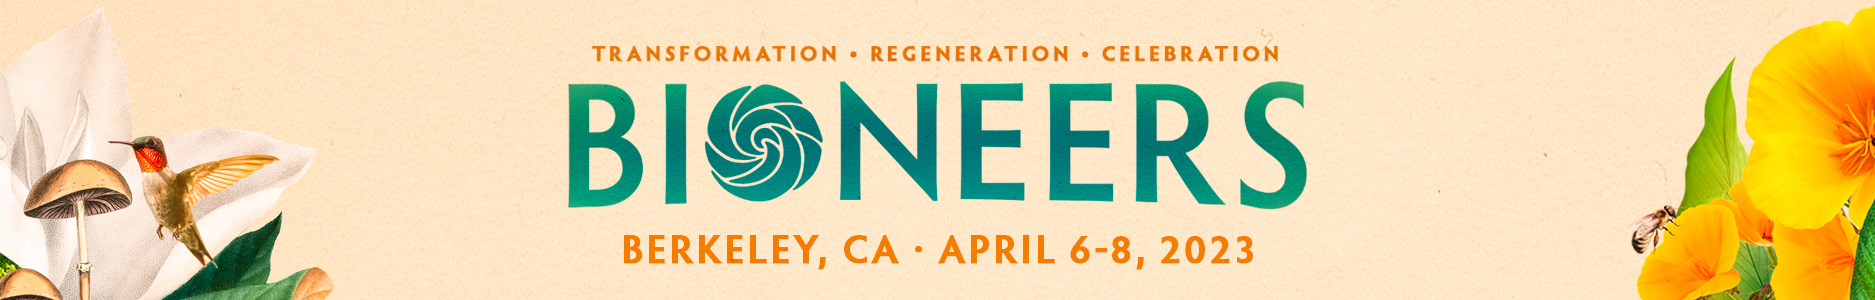 Bioneers 2023 Conference